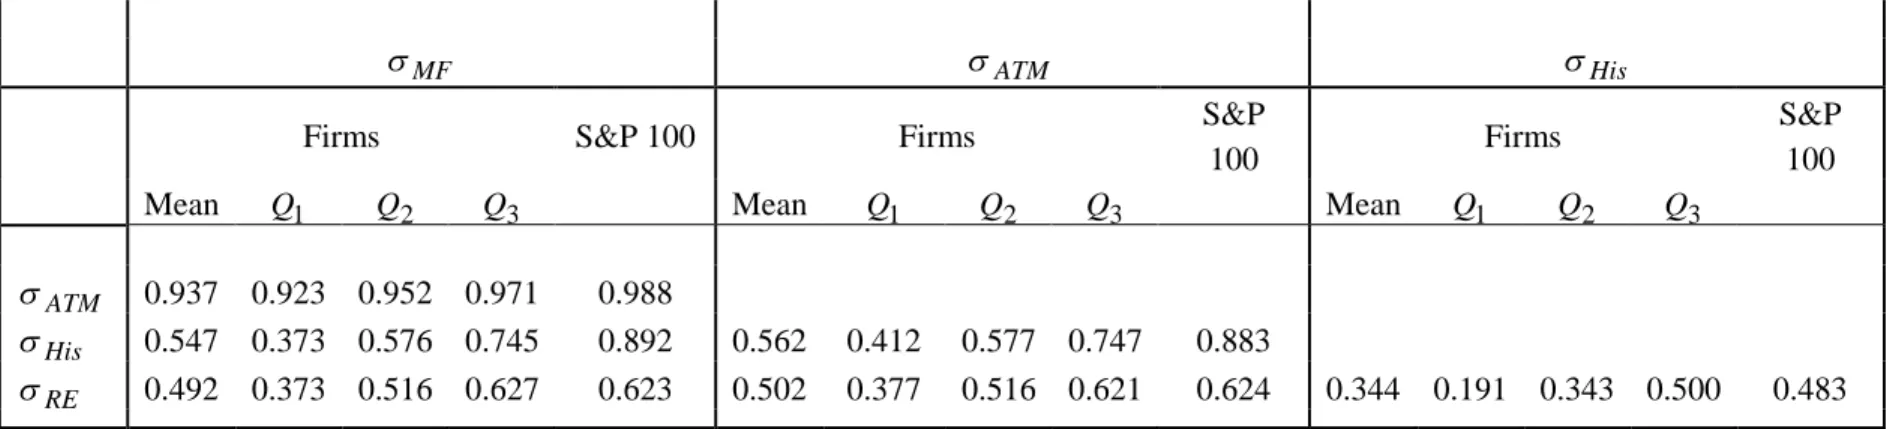 Table 3 Summary statistics for the correlations between volatility measures